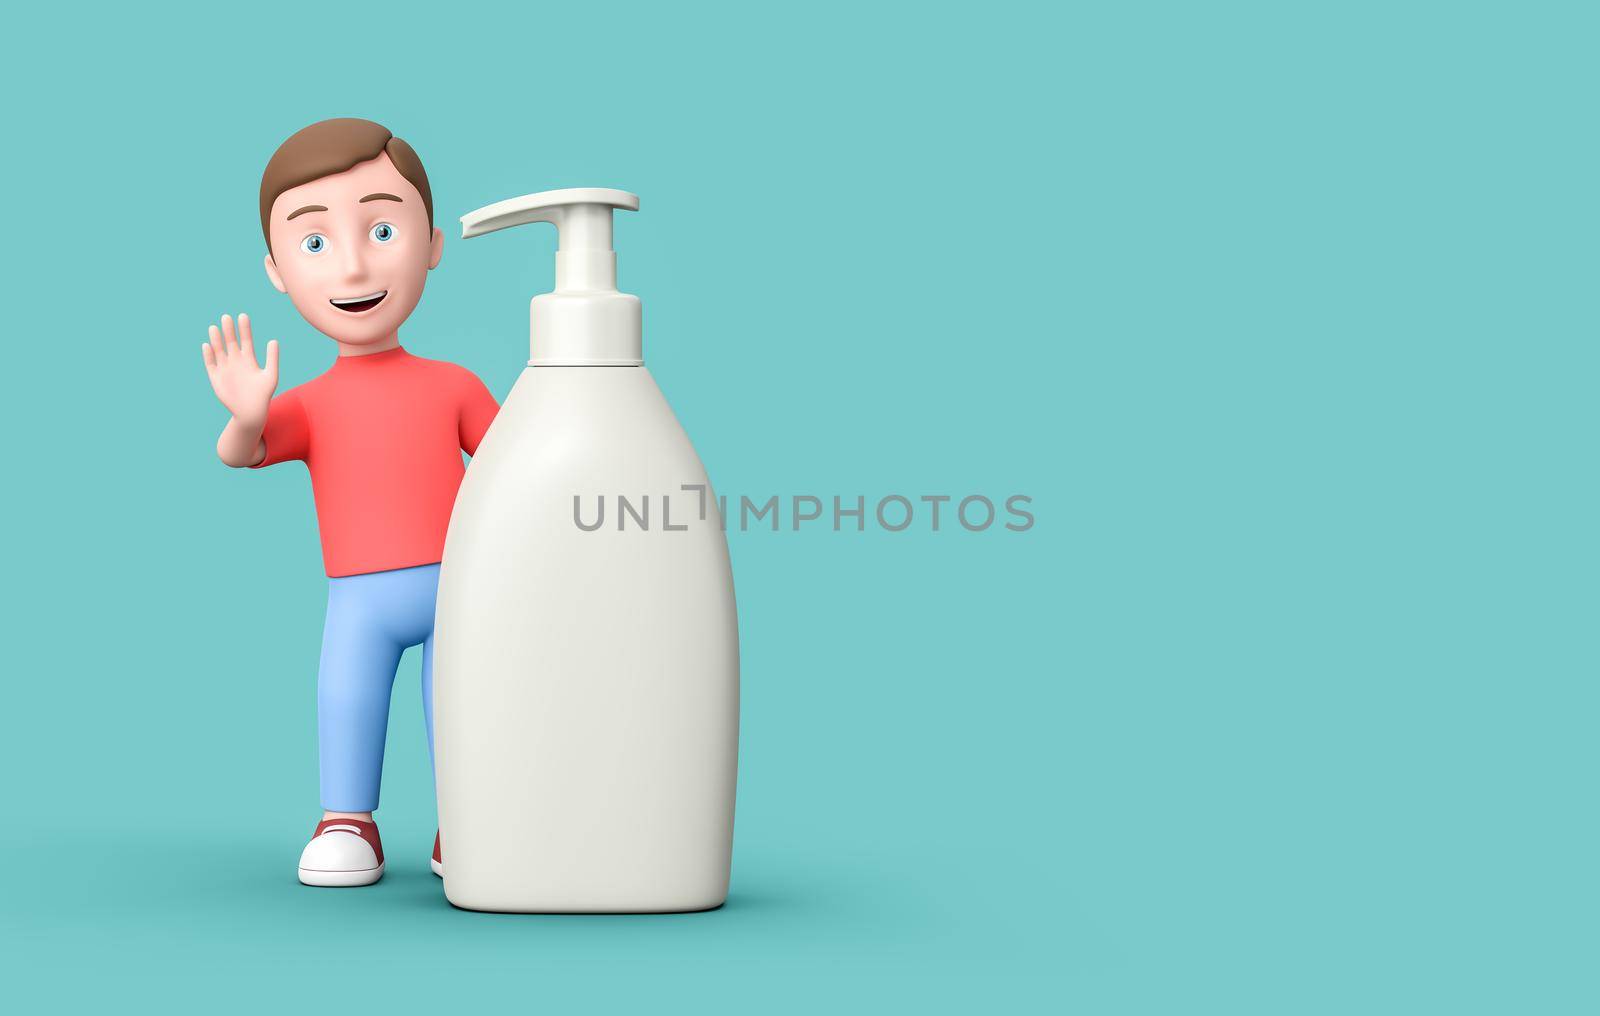 Happy Young Kid 3D Cartoon Character with Blank White Liquid Soap Dispenser on Blue Background with Copy Space 3D Illustration